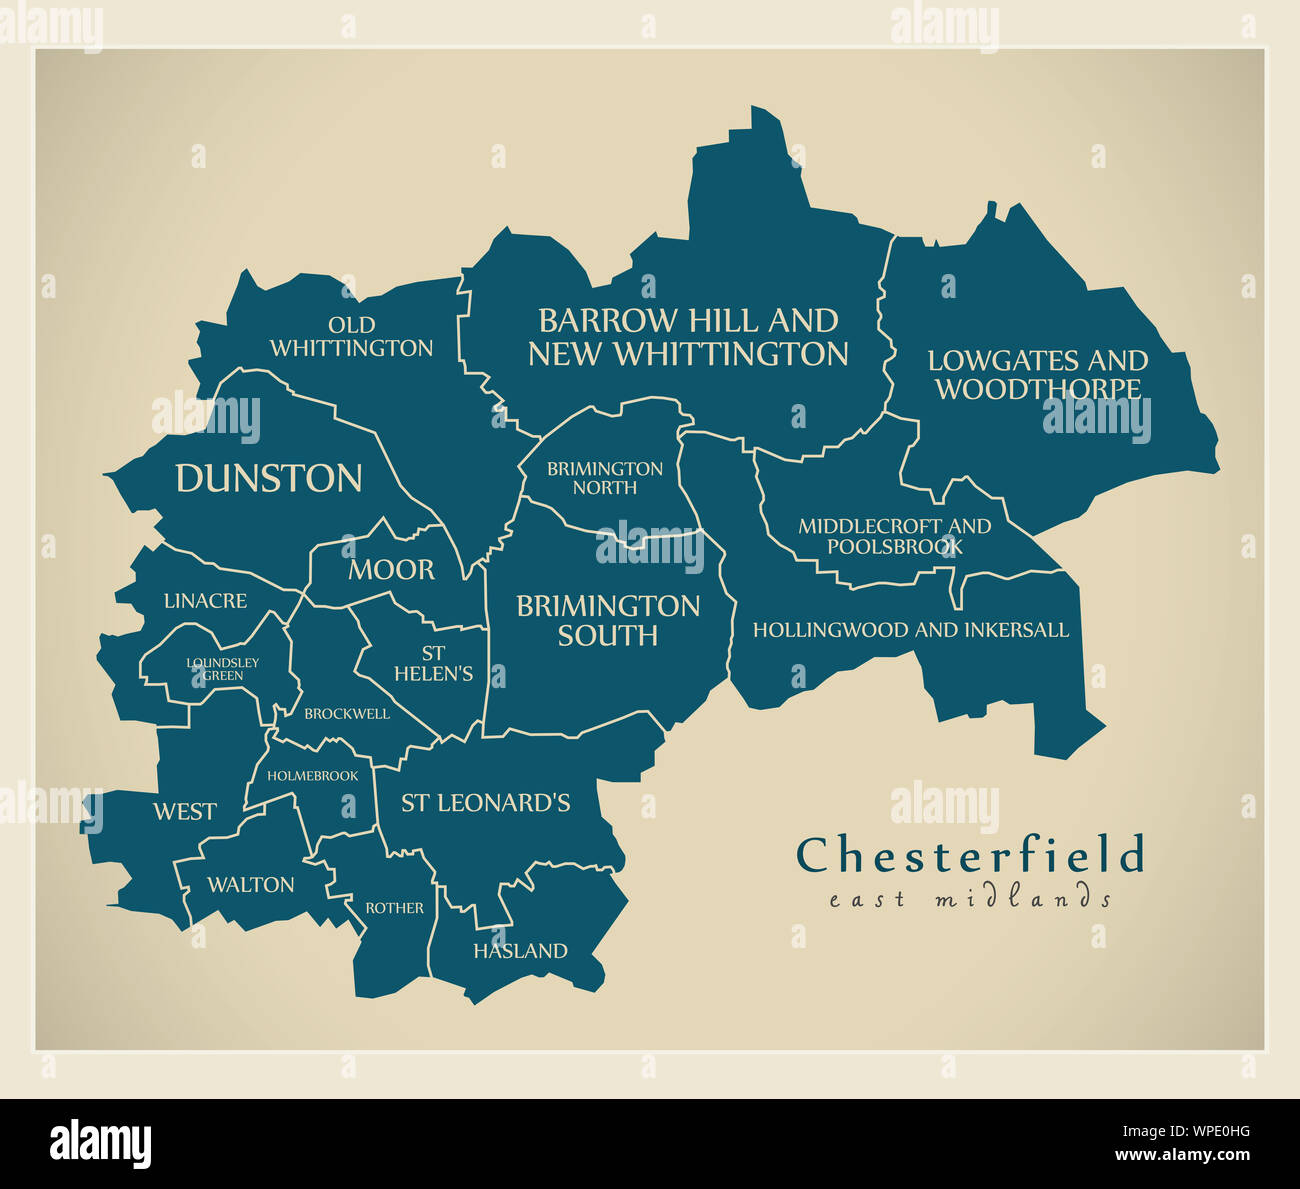 Wards map of Chesterfield district in East Midlands England UK with ...